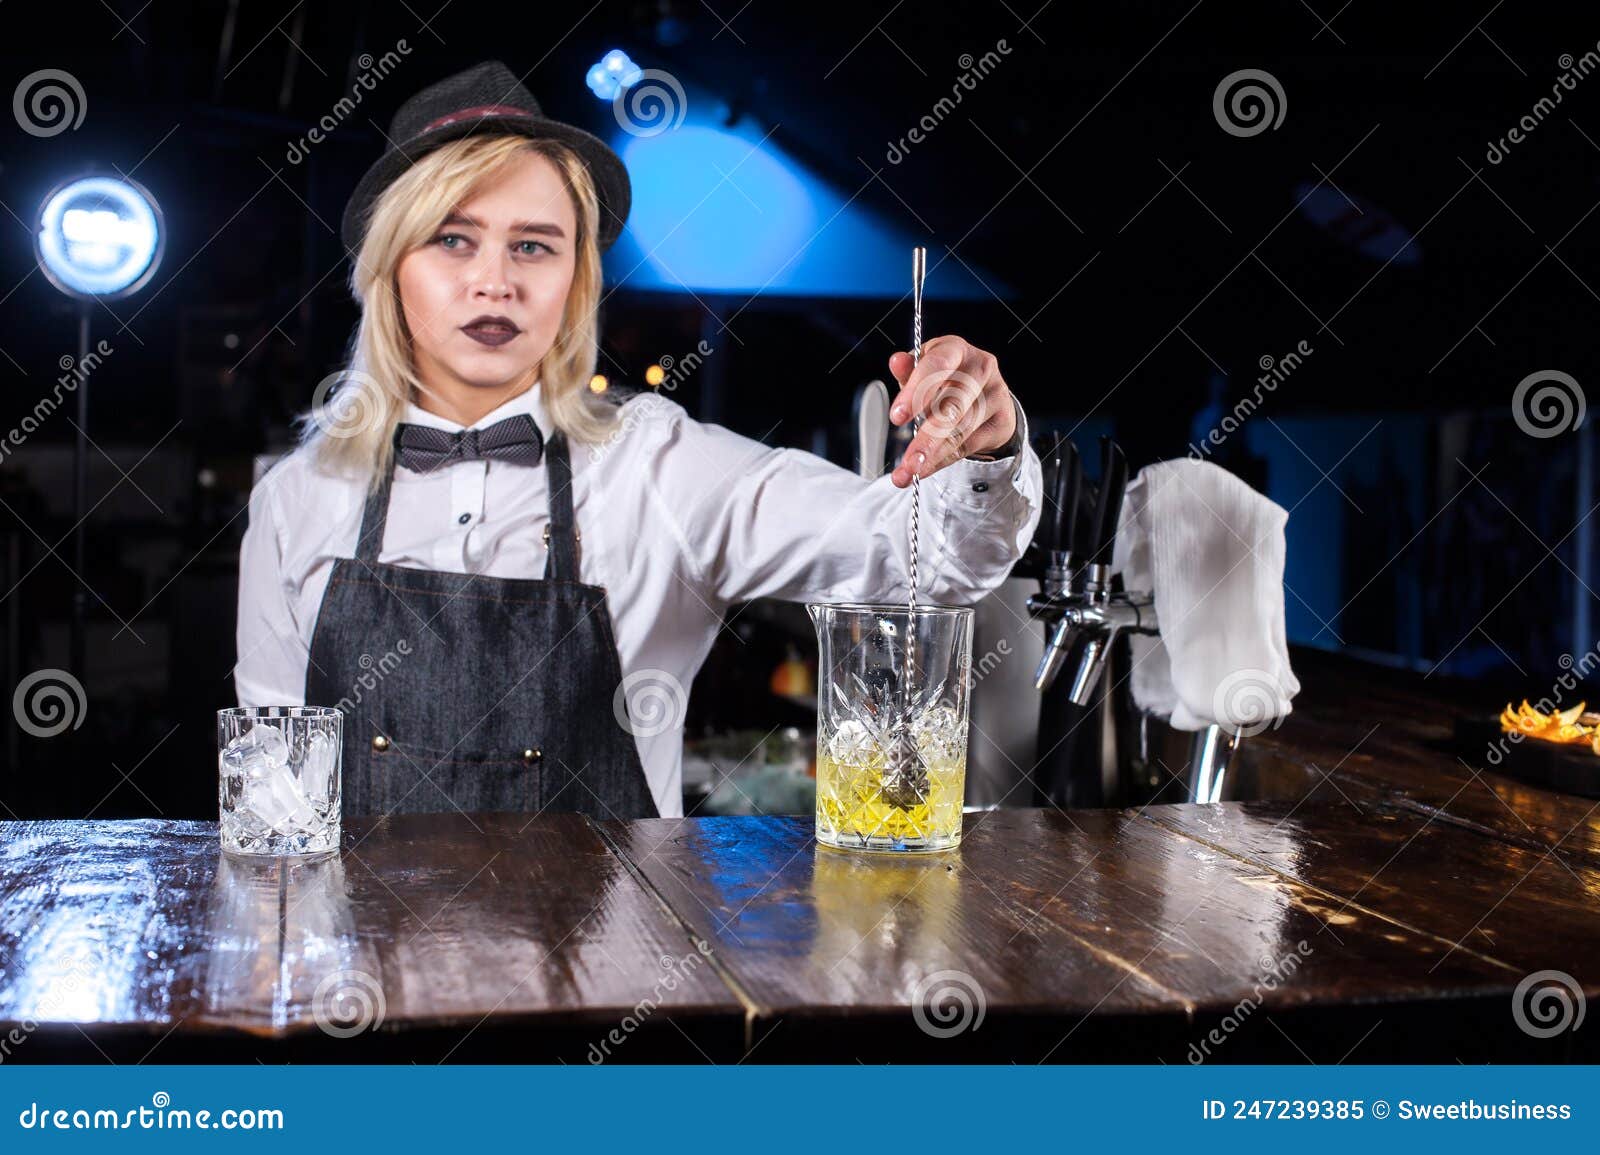 Charming Girl Barman Makes a Cocktail while Standing Near the Bar ...